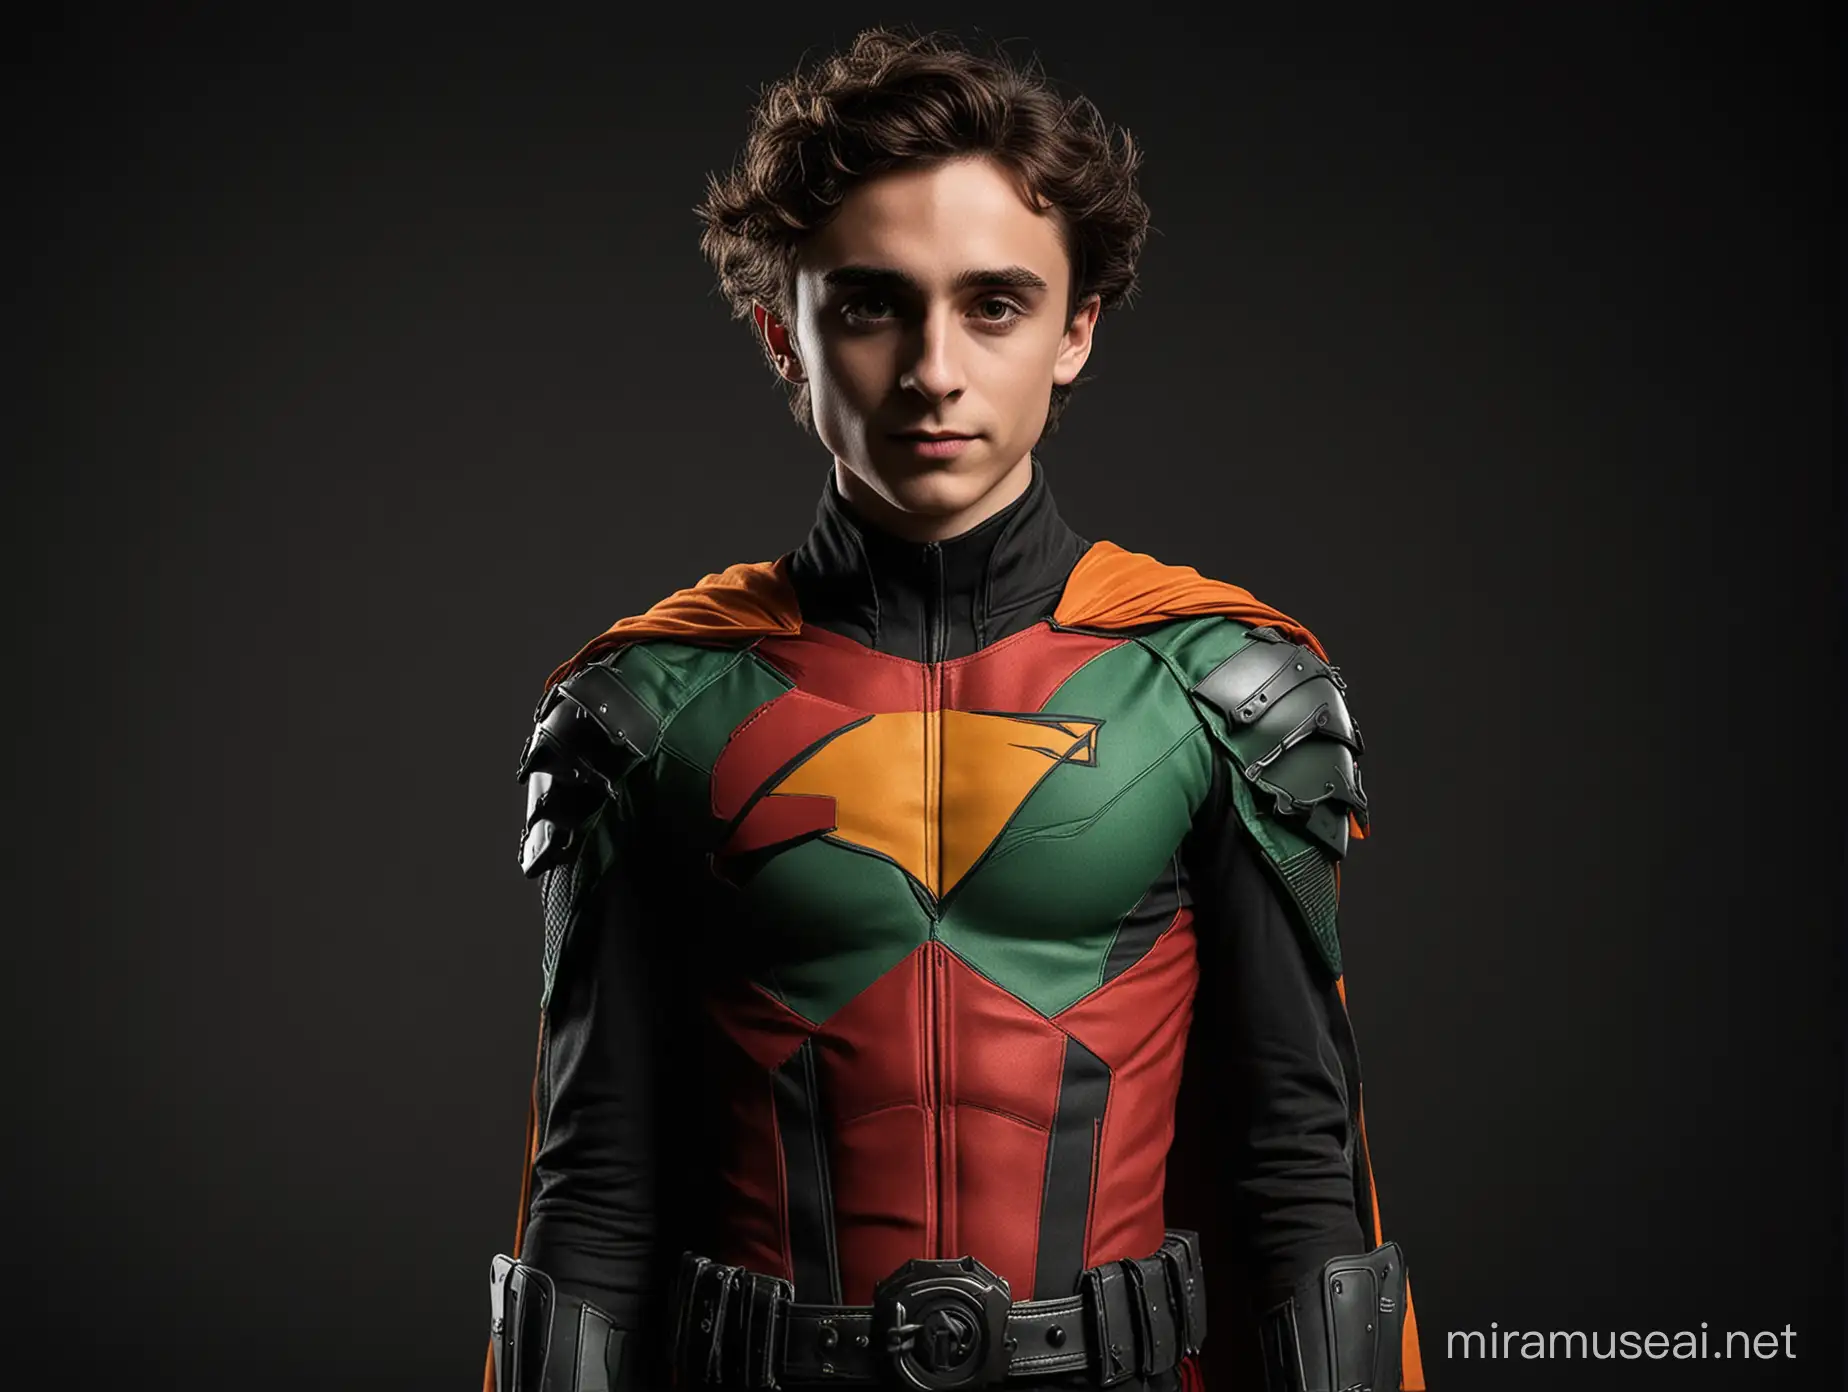 Timothe Chalamet Cosplaying as Teen Titans Robin in Dramatic Lighting